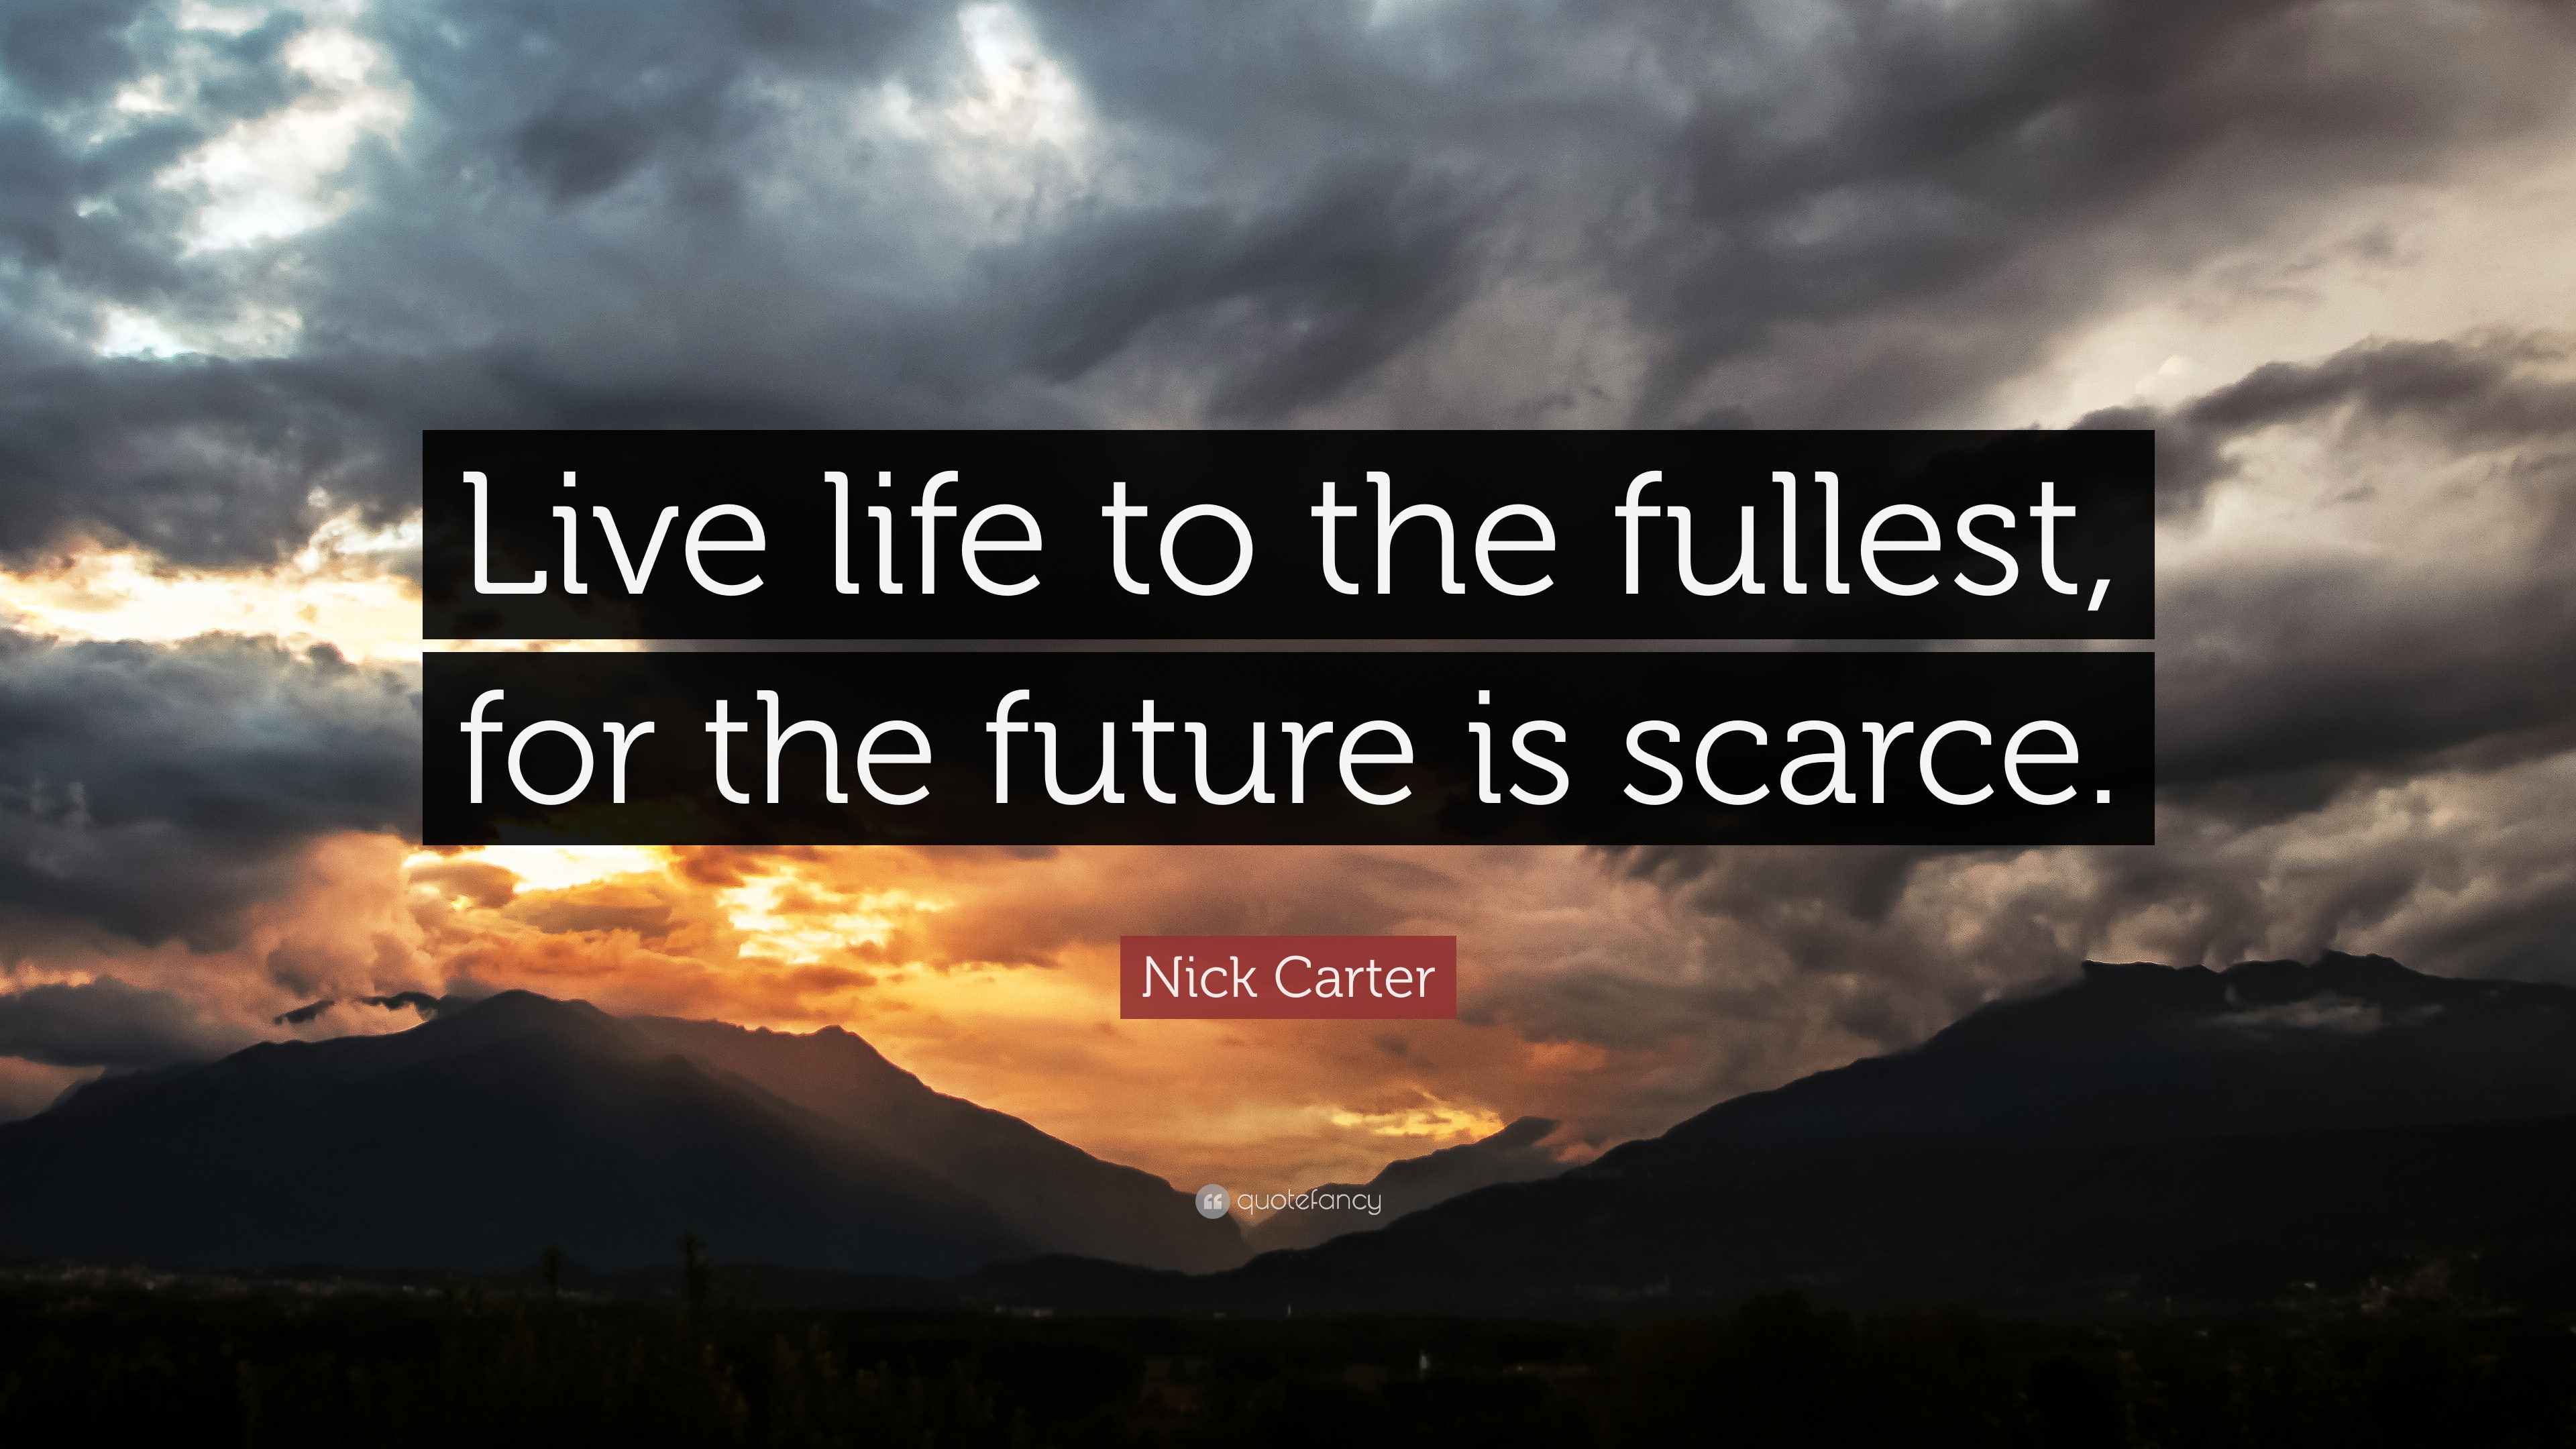 Nick Carter Quote: “Live life to the fullest, for the future is scarce.”